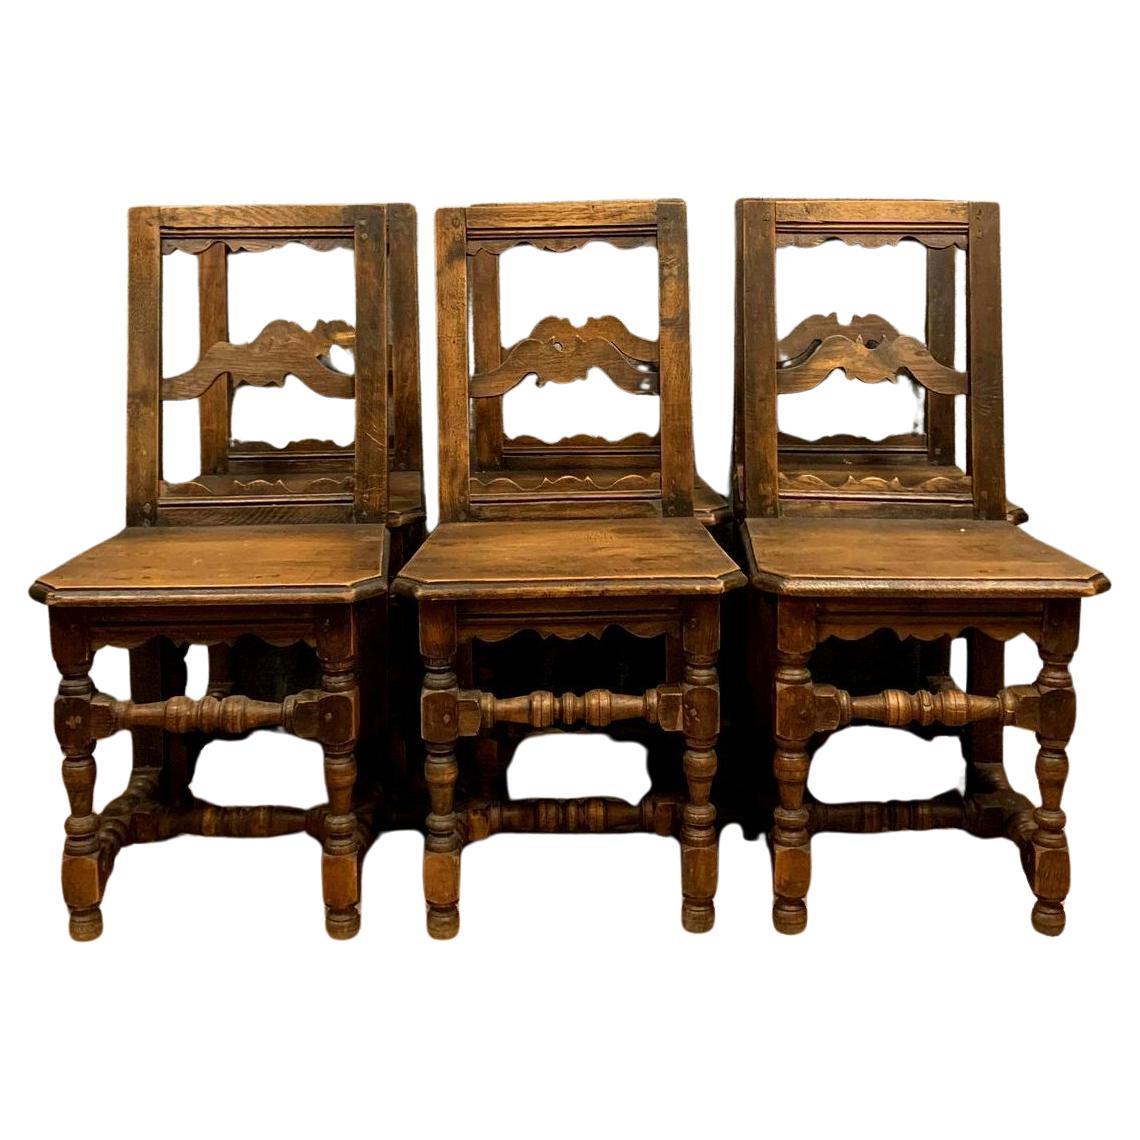 Important Set of 6 Solid Oak Lorraine Chairs, Circa 1850 -1X28